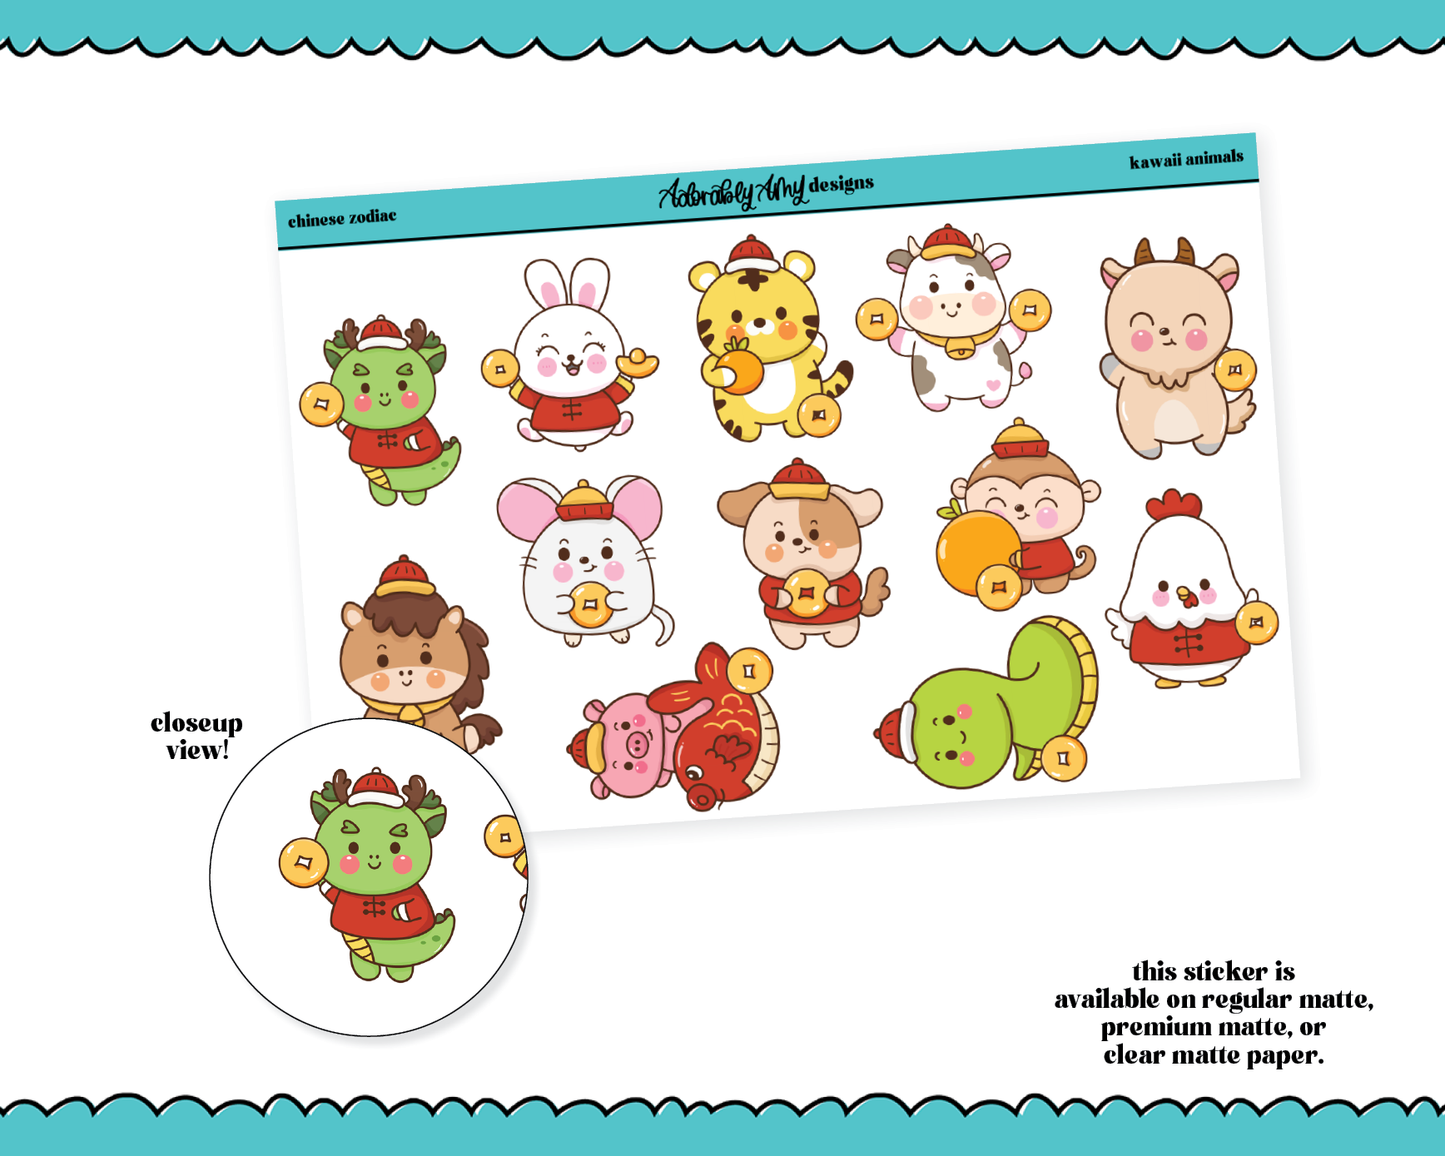 Doodled Kawaii Chinese Zodiac Animals Decorative Planner Stickers for any Planner or Insert